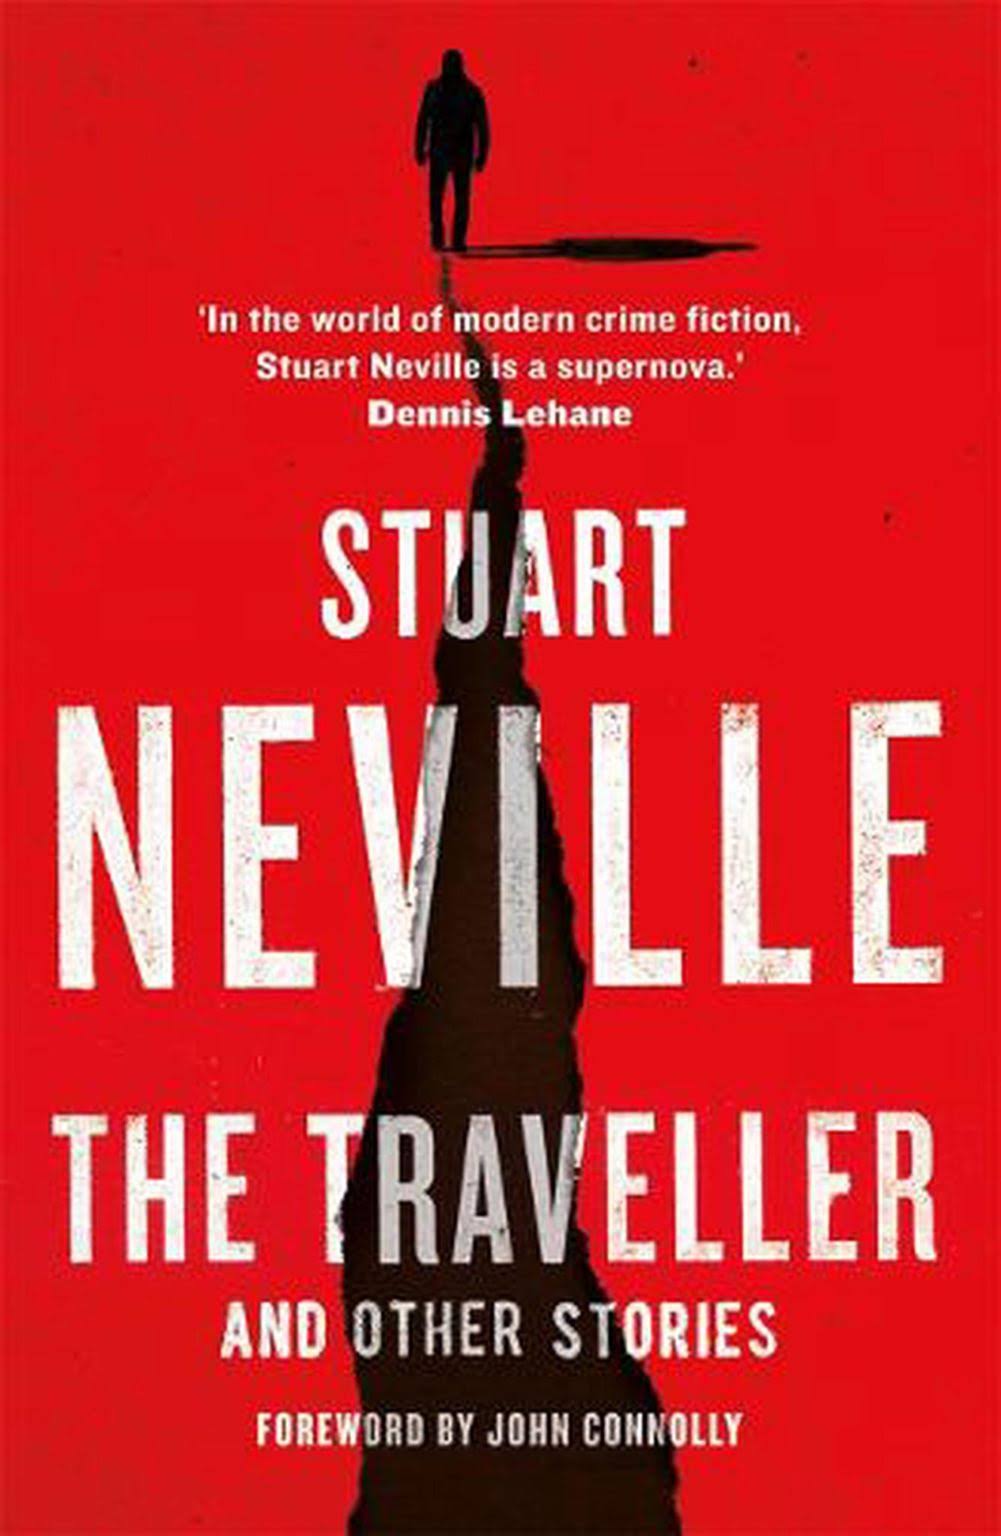 The Traveller and Other Stories [Book]